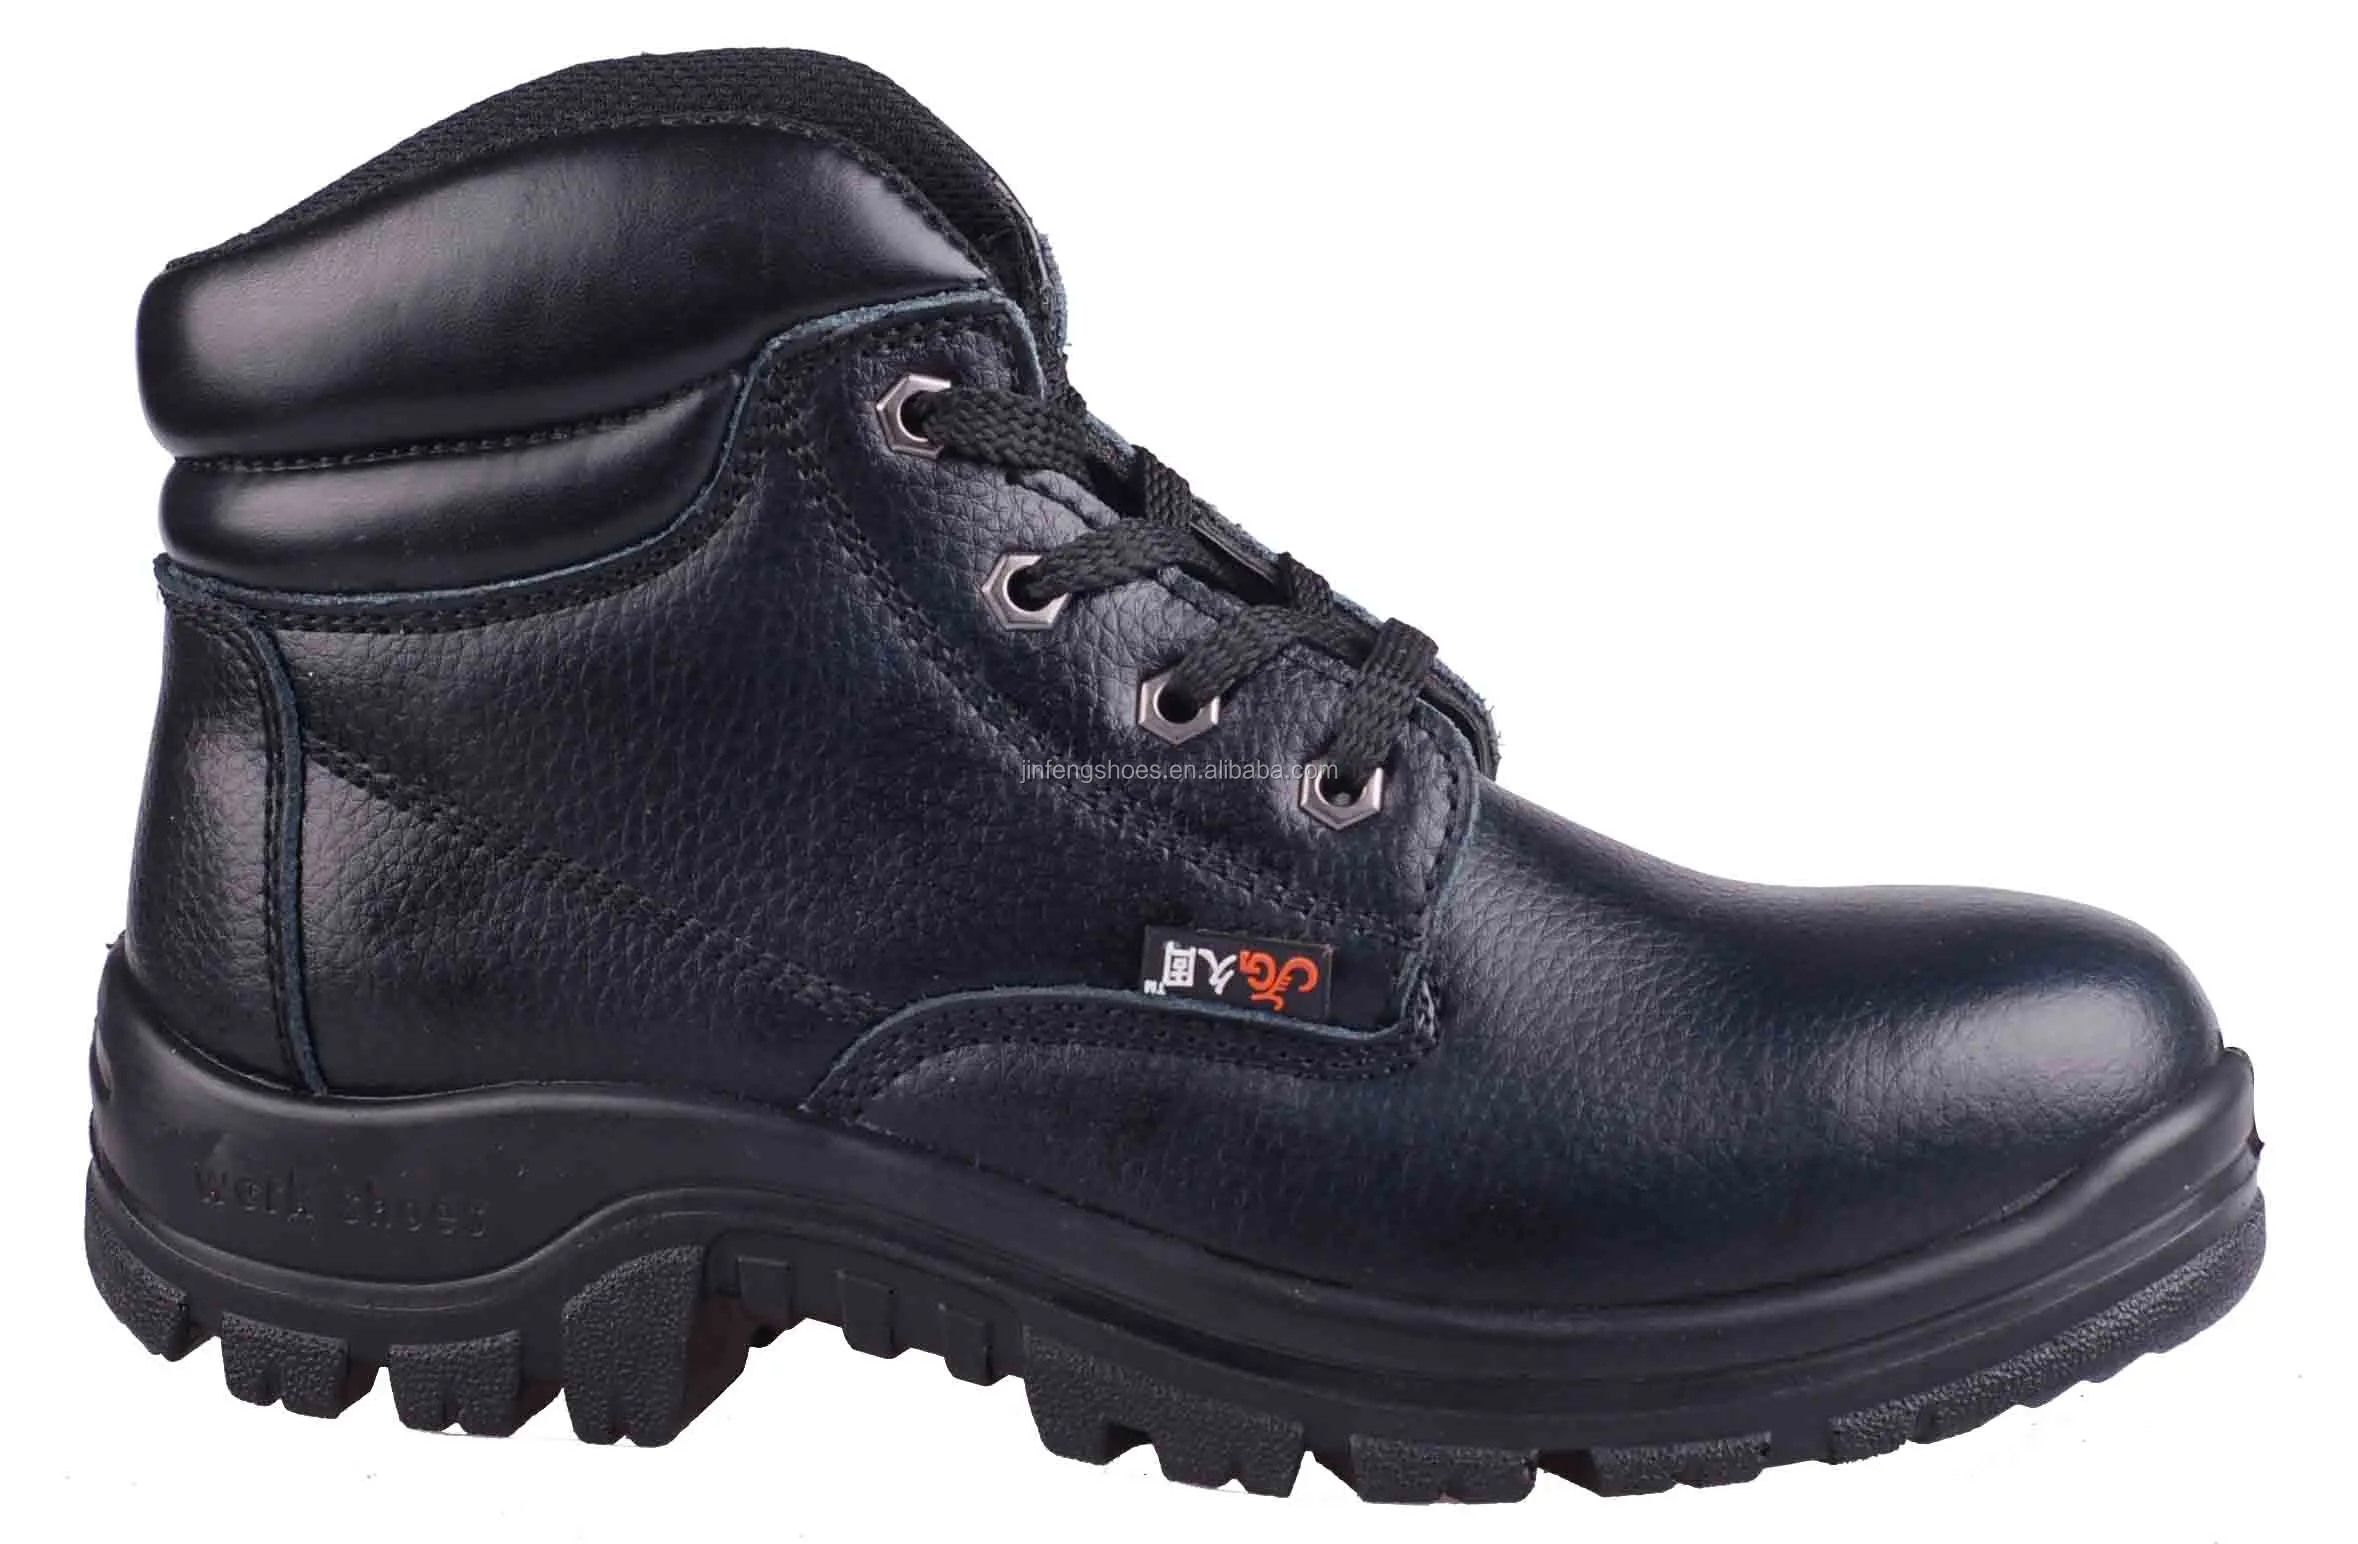 safety shoes liberty price